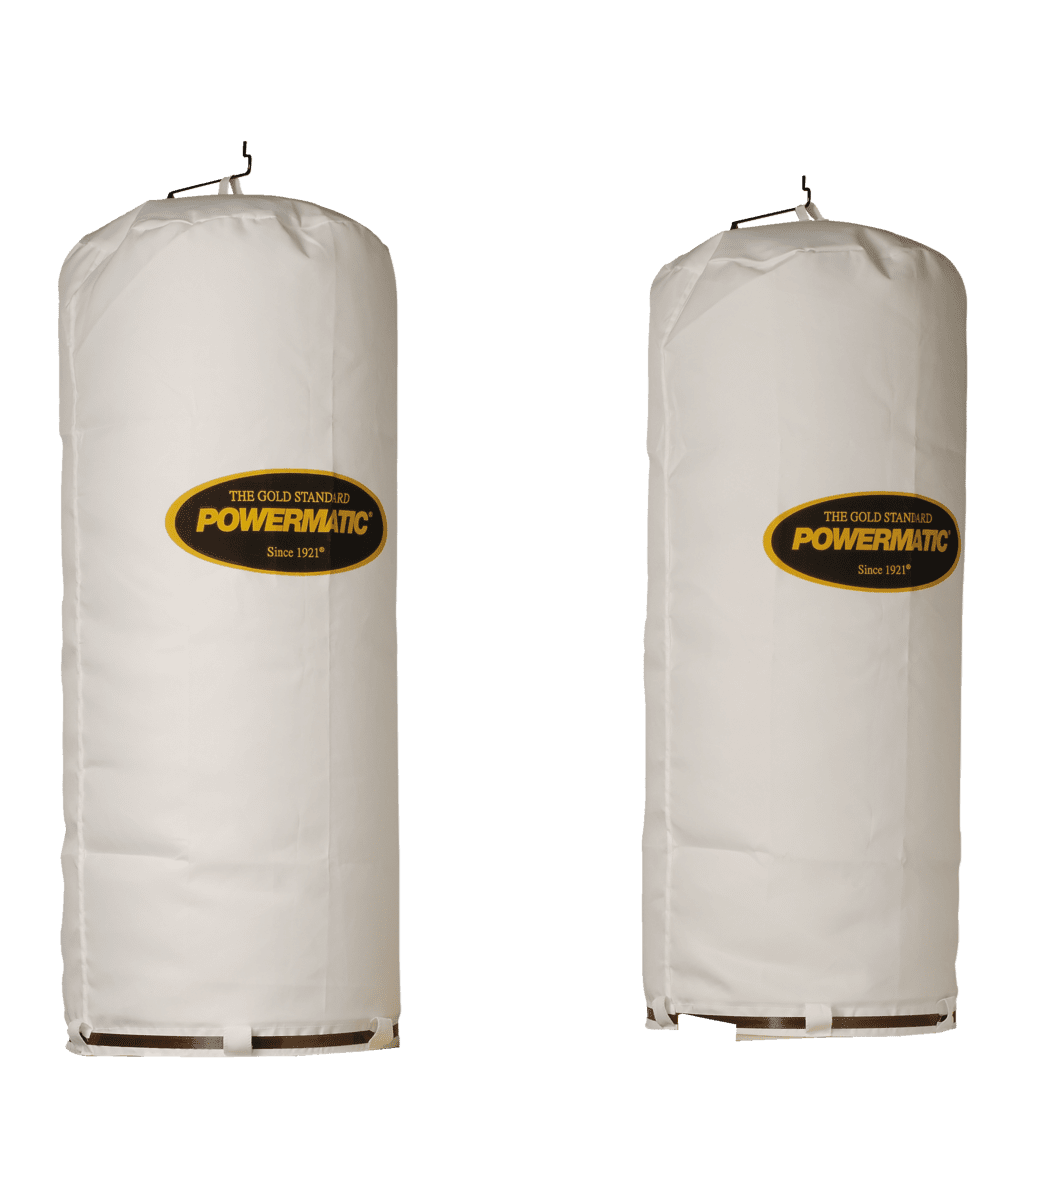 POWERMATIC Filter Bag For PM1900 Dust Collector